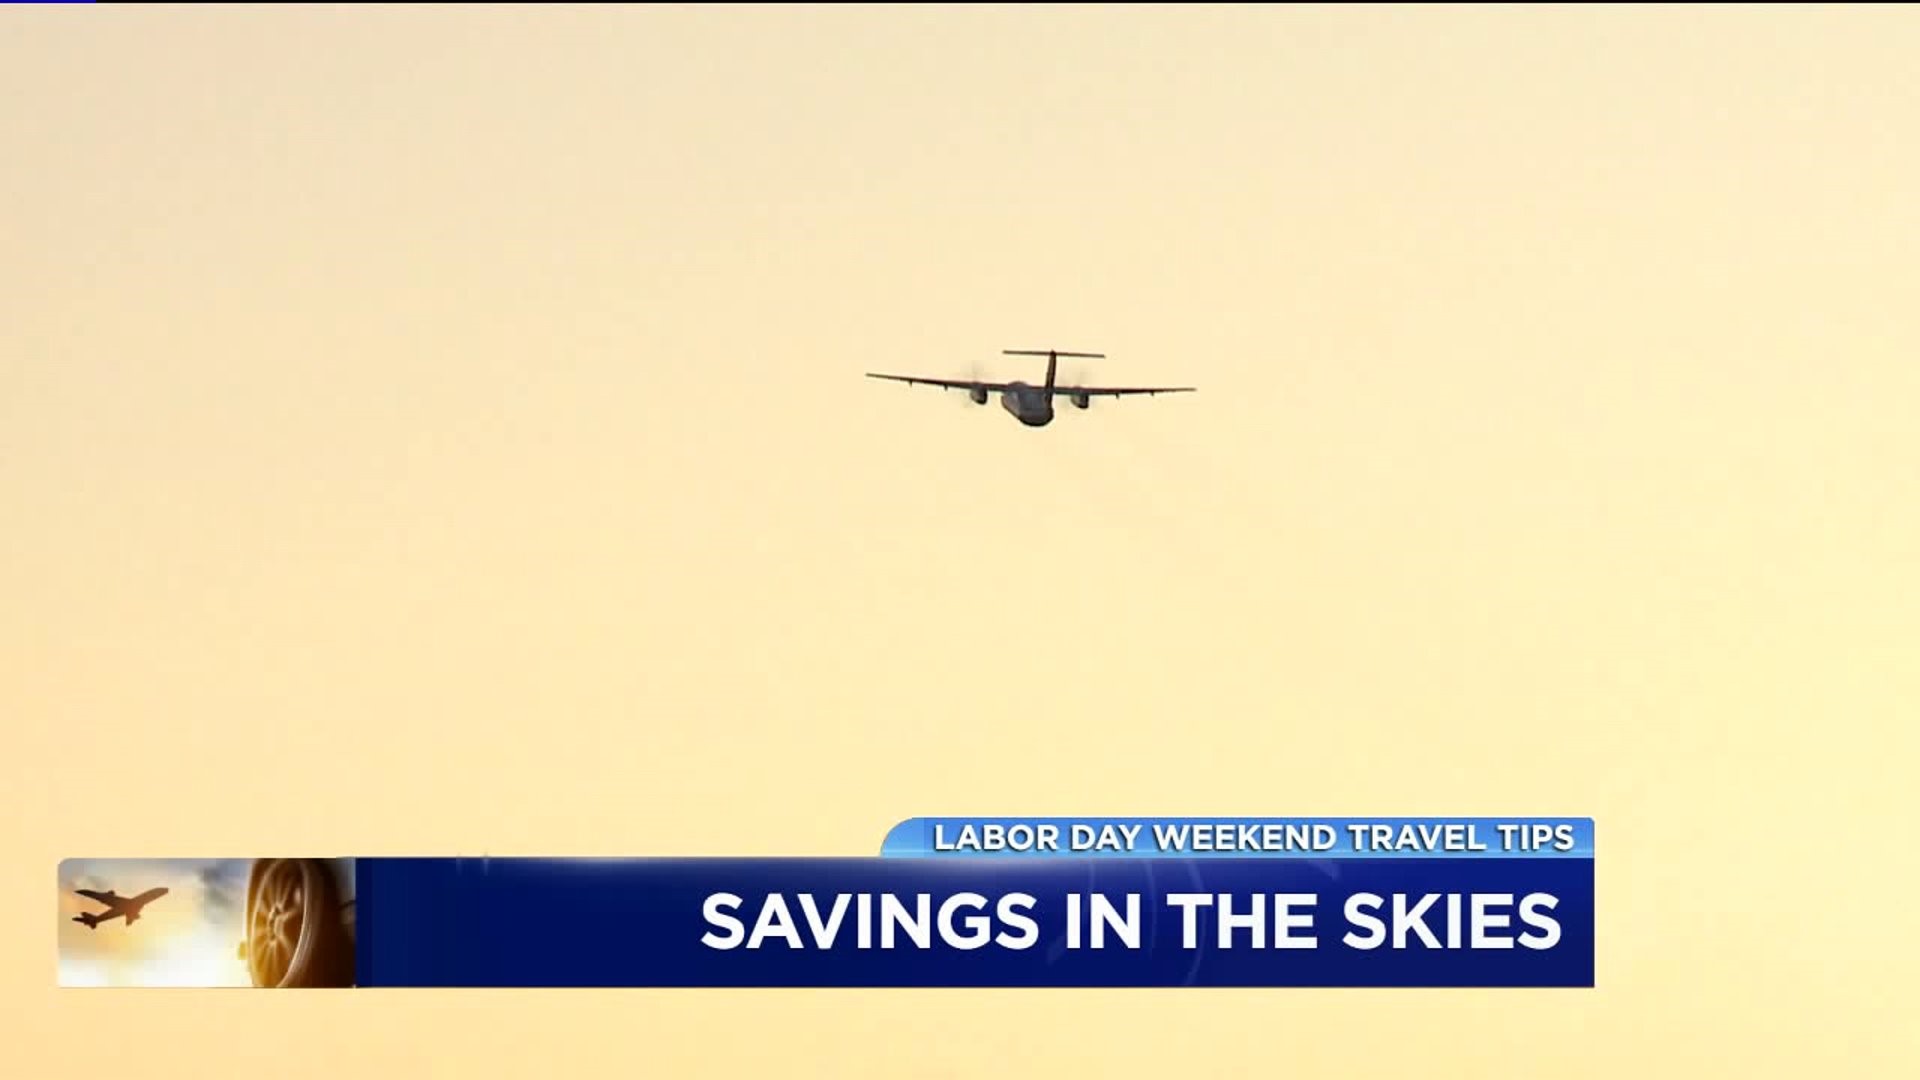 Labor Day Weekend Travel Tips: Savings in the Skies